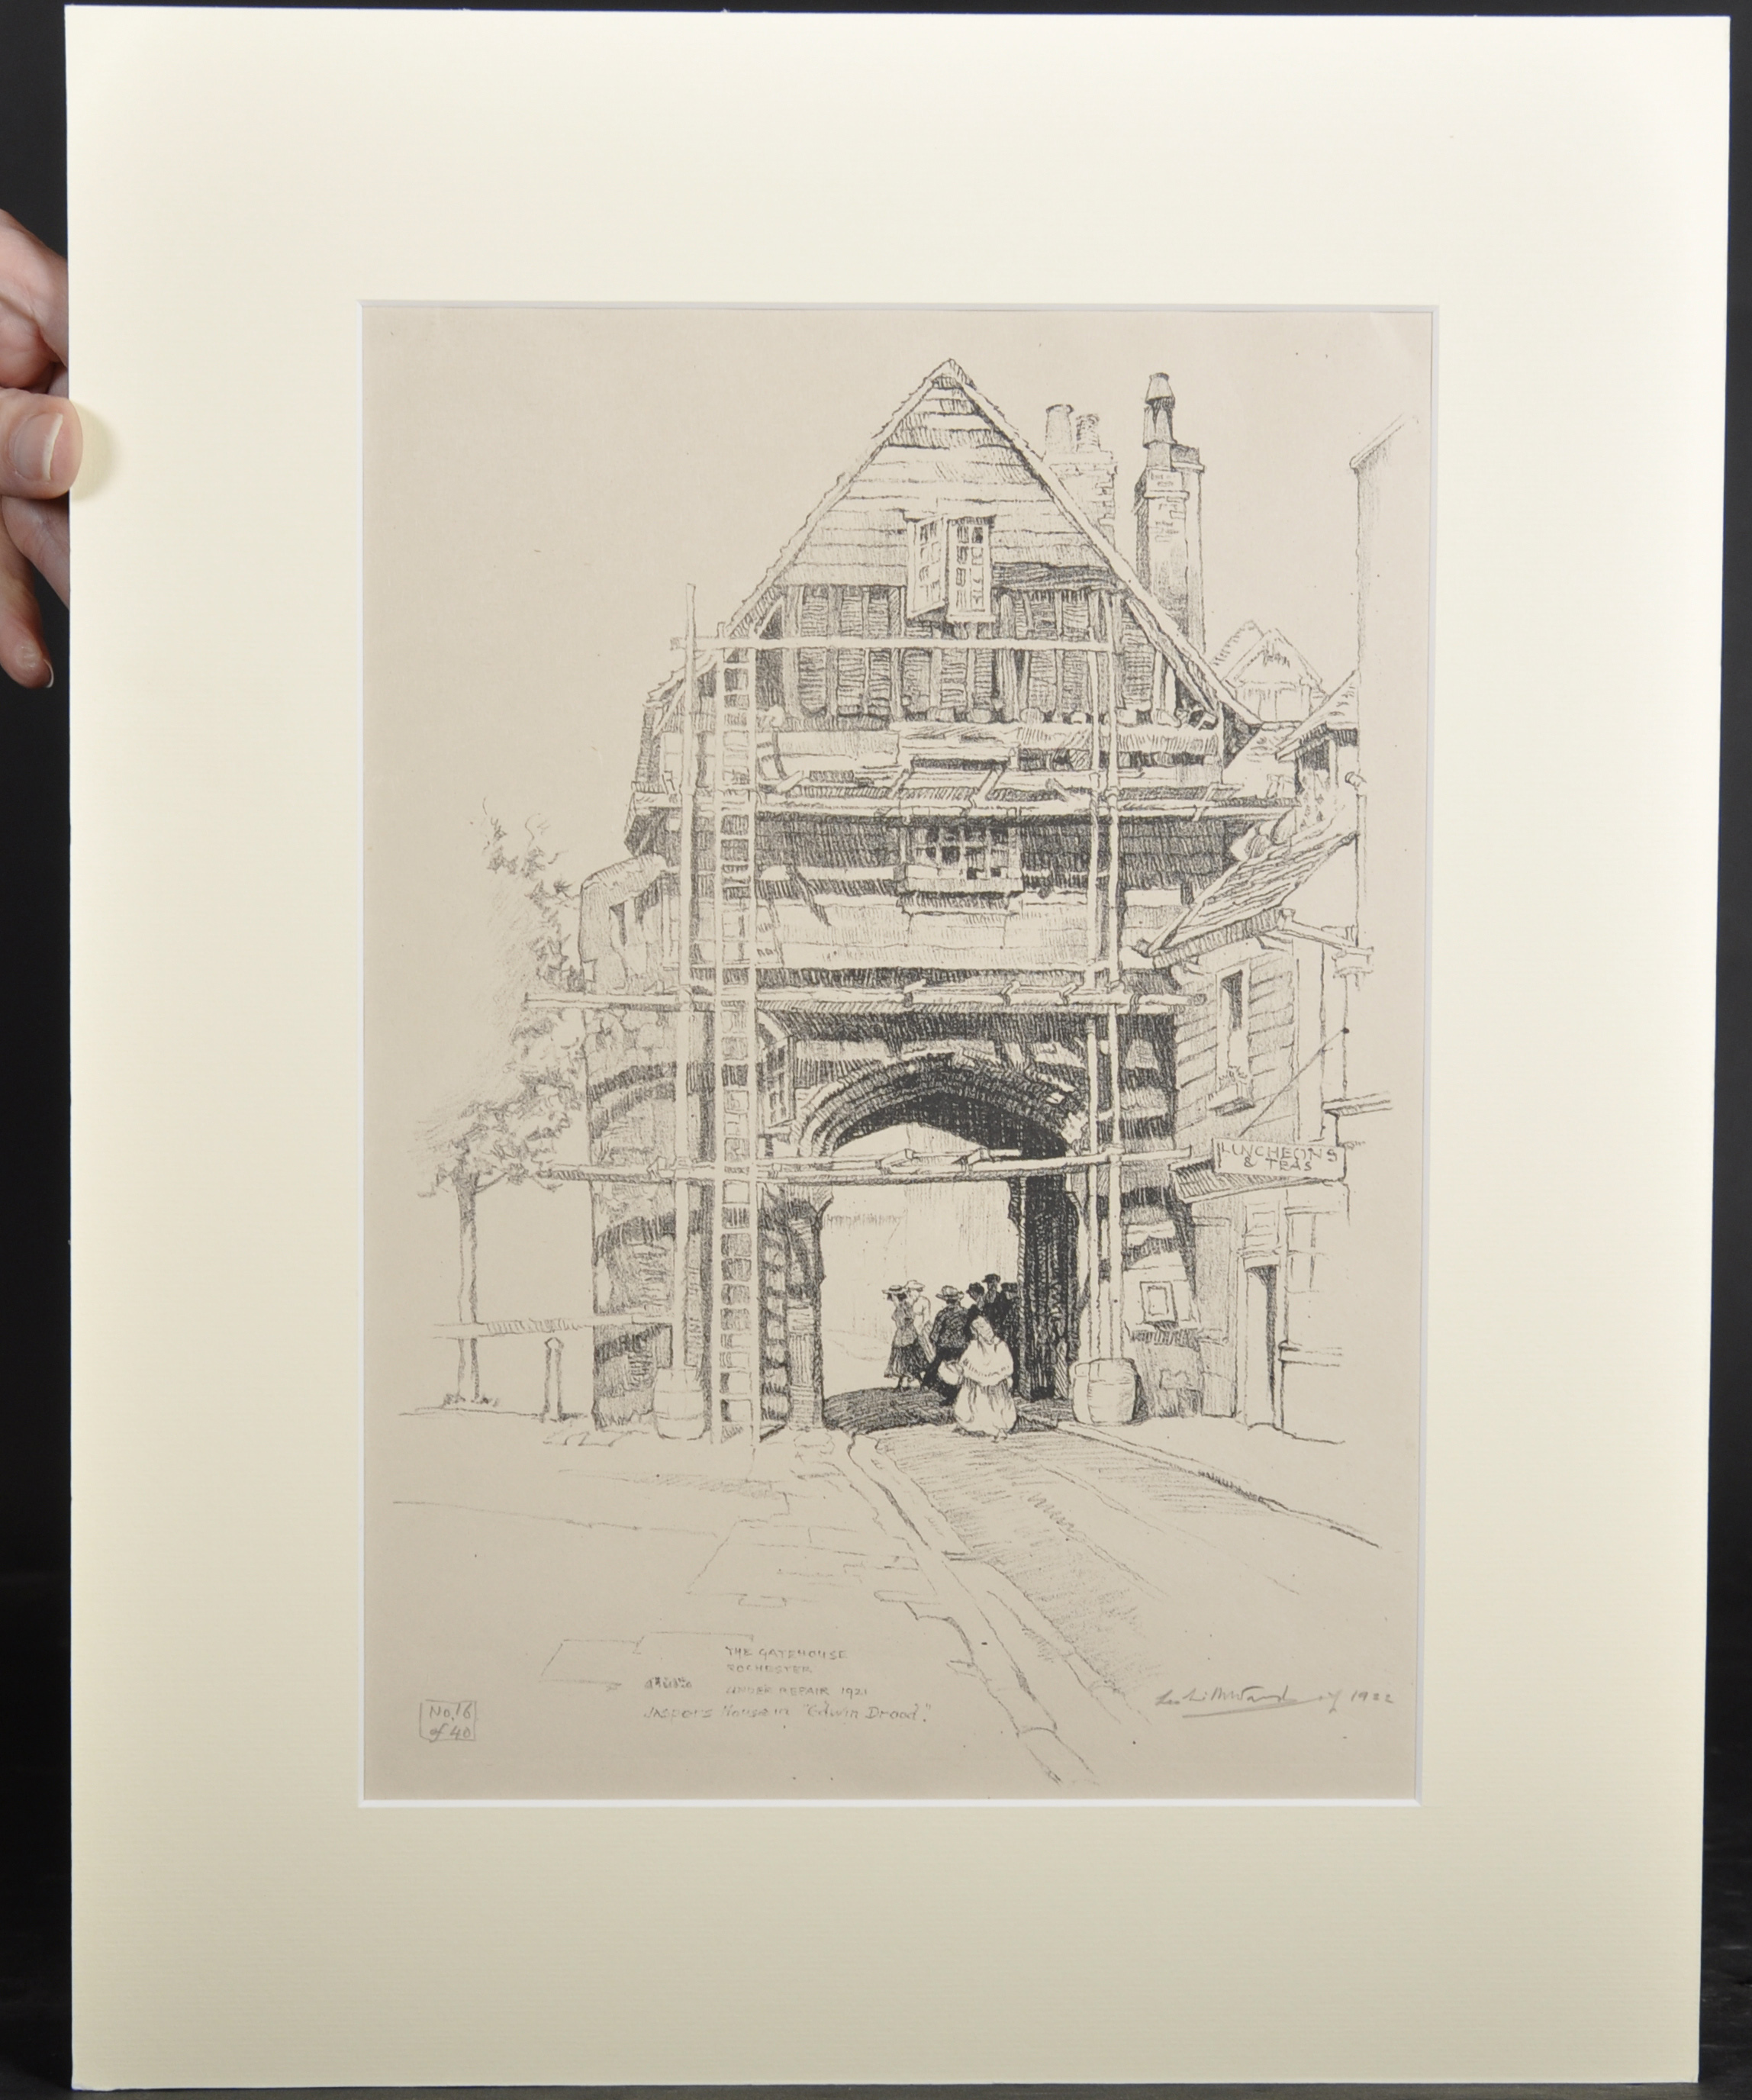 Leslie Moffat Ward (1888-1978) British. "The Gatehouse, Rochester", Lithograph, Signed, Dated 1922 - Image 2 of 4